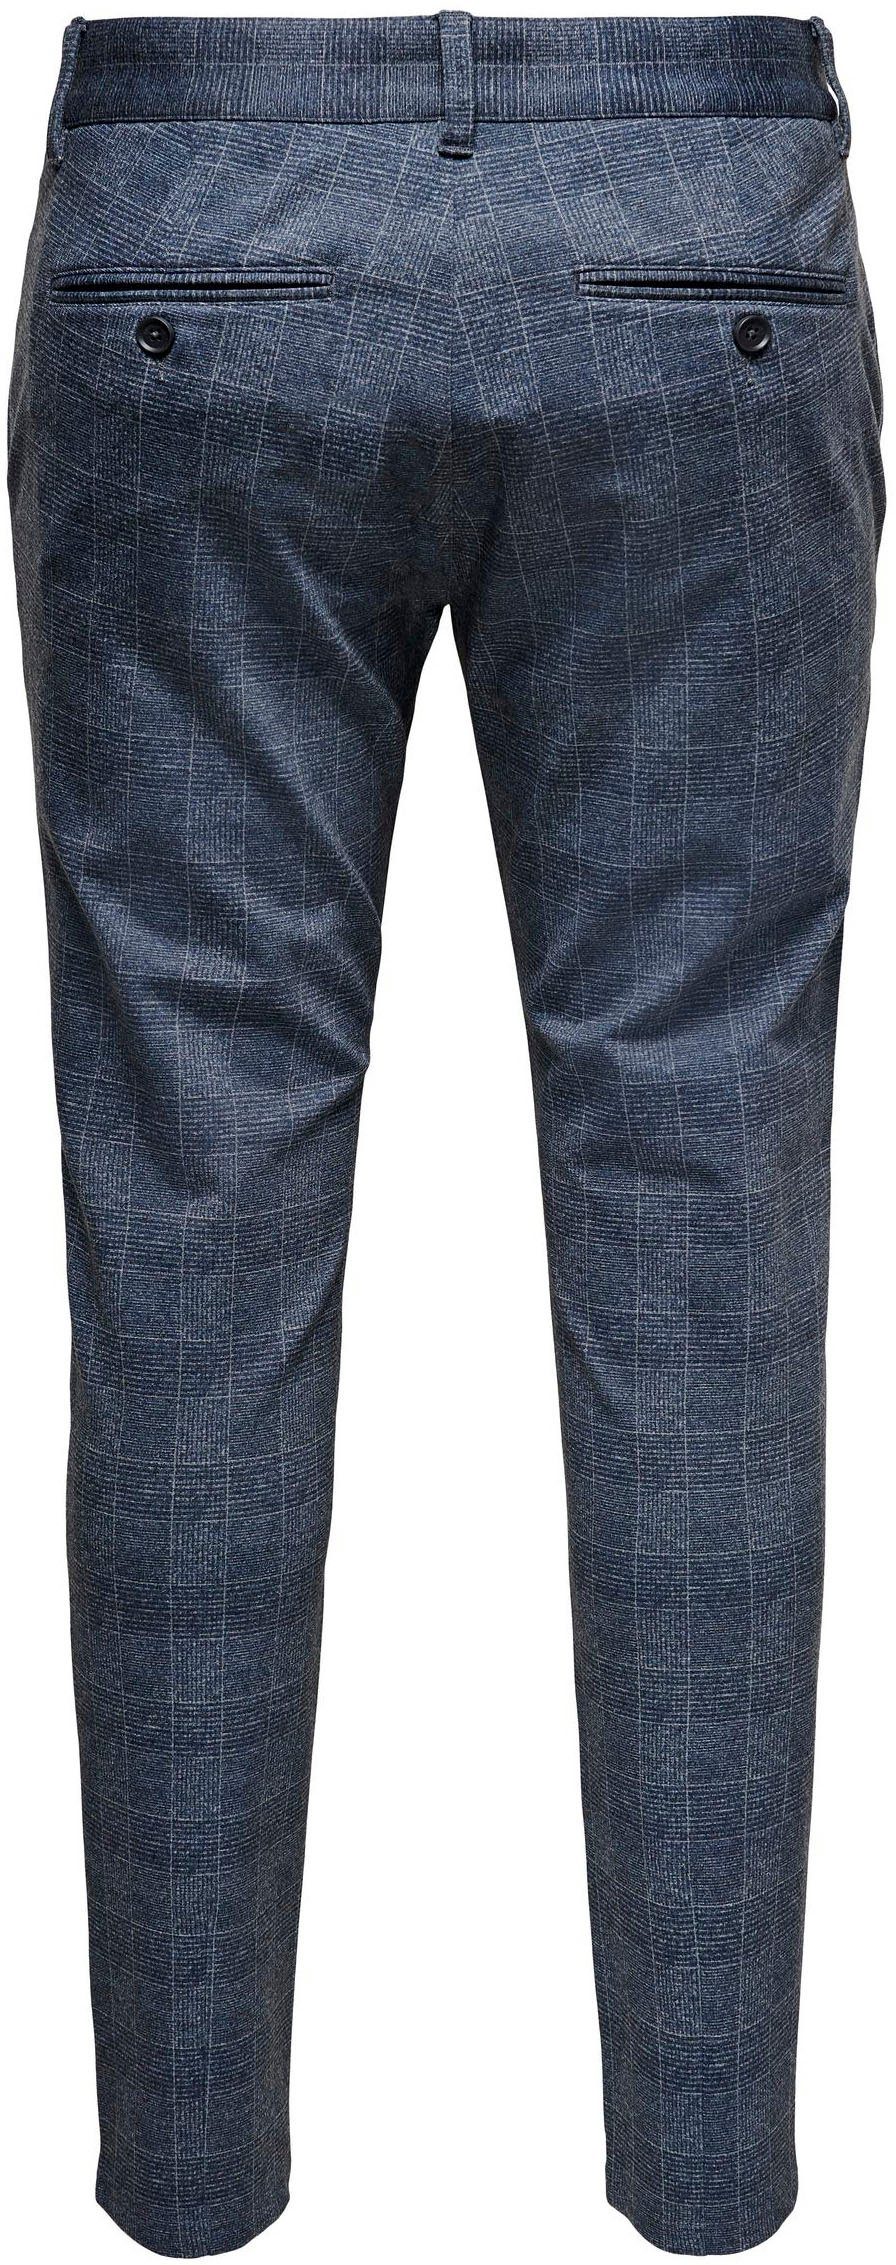 PANTS MARK blau SONS Chinohose ONLY & kariert CHECK